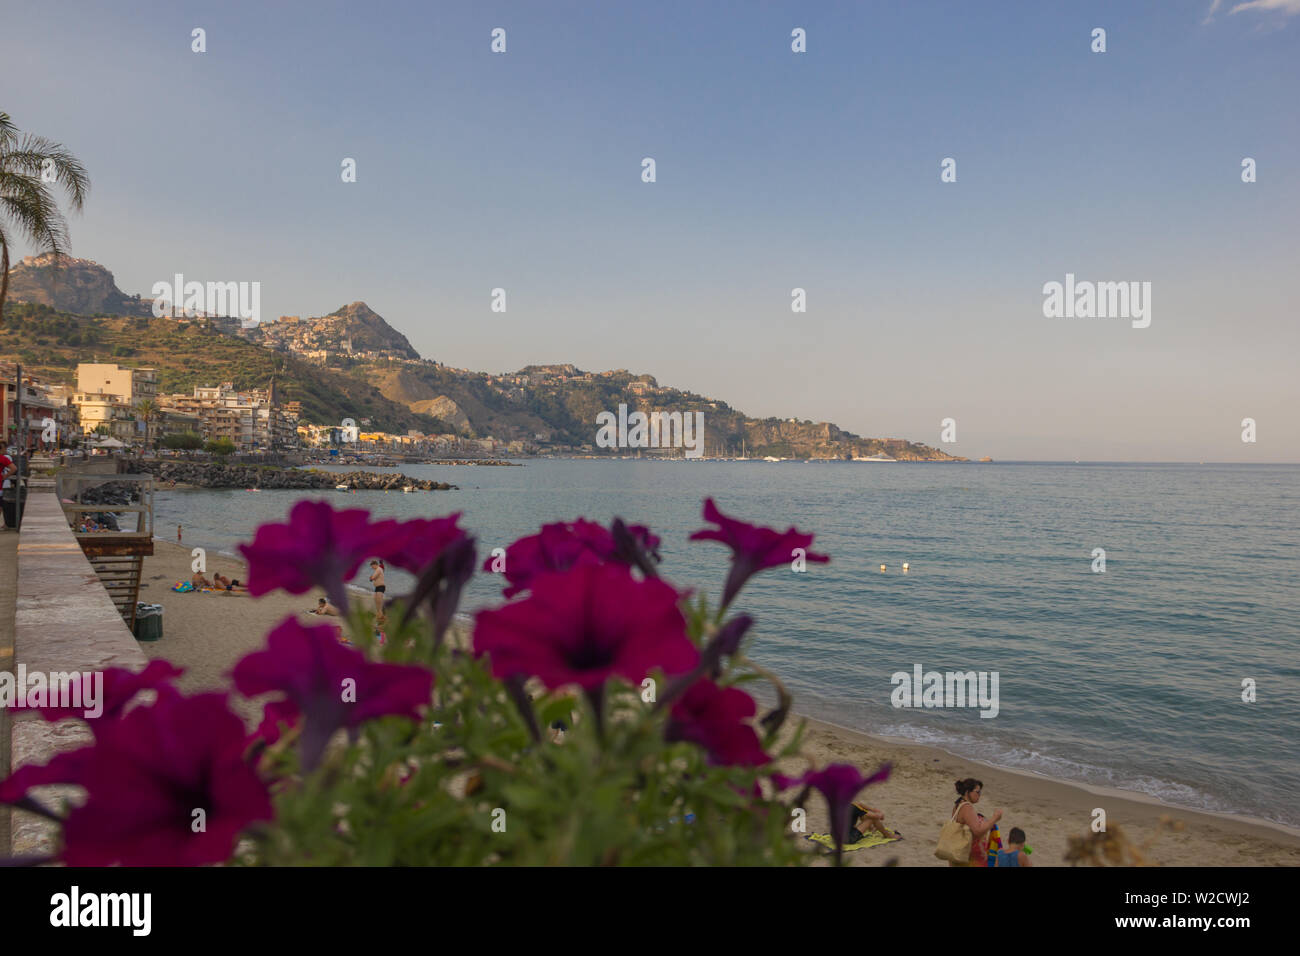 Giardini Naxos Sicily Italy 2019 beautiful landscape of the coastline in Summer from the main street with some close flowers, scenic seascape Stock Photo